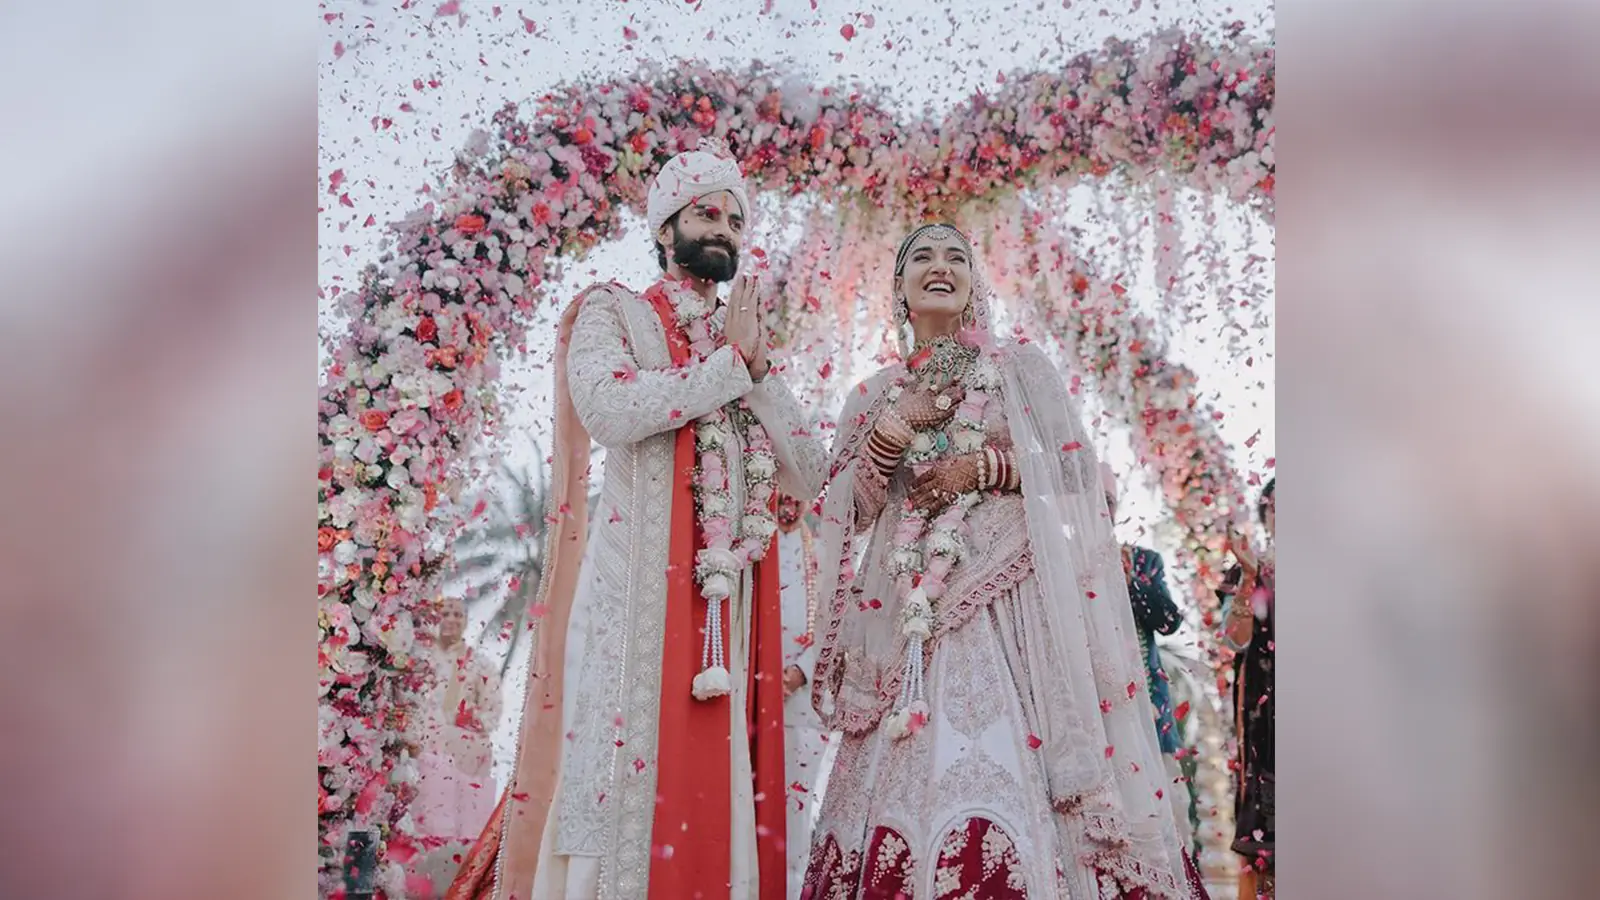 Dancer Mukti Mohan Ties the Knot with 'Animal' Actor Kunal Thakur in Intimate Ceremony